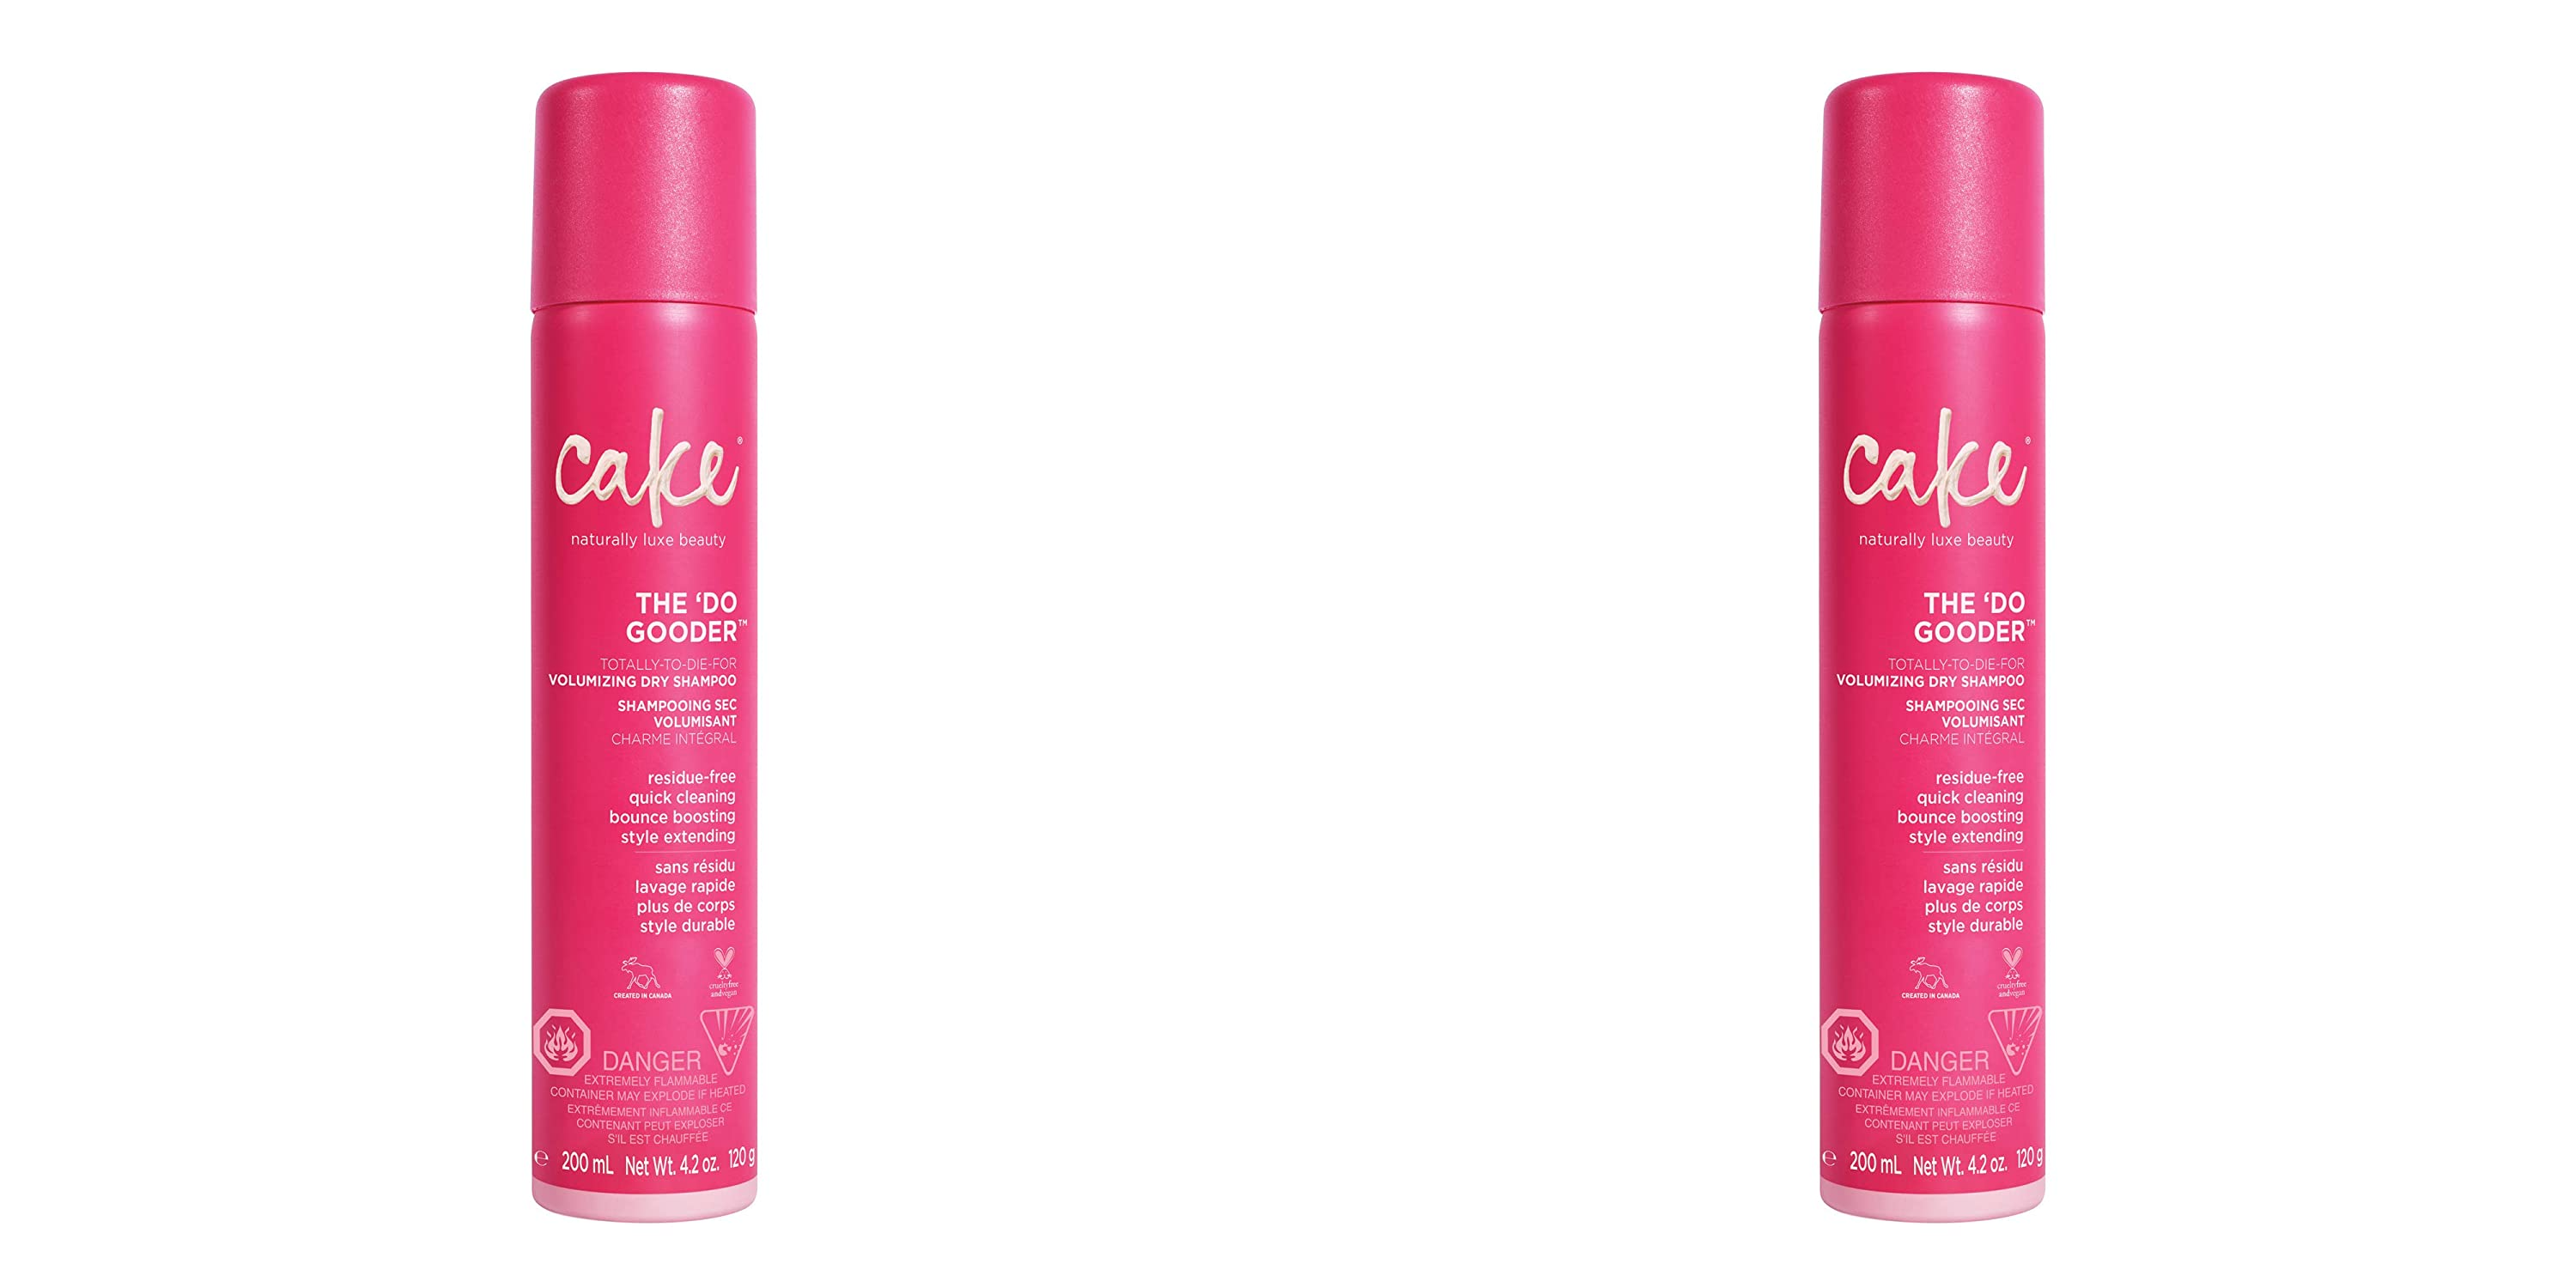 200ml Cake Beauty The Do Gooder Volumizing Dry Shampoo 2 for $9 ($4.50 each) + Free Shipping w/ Prime or on $25+